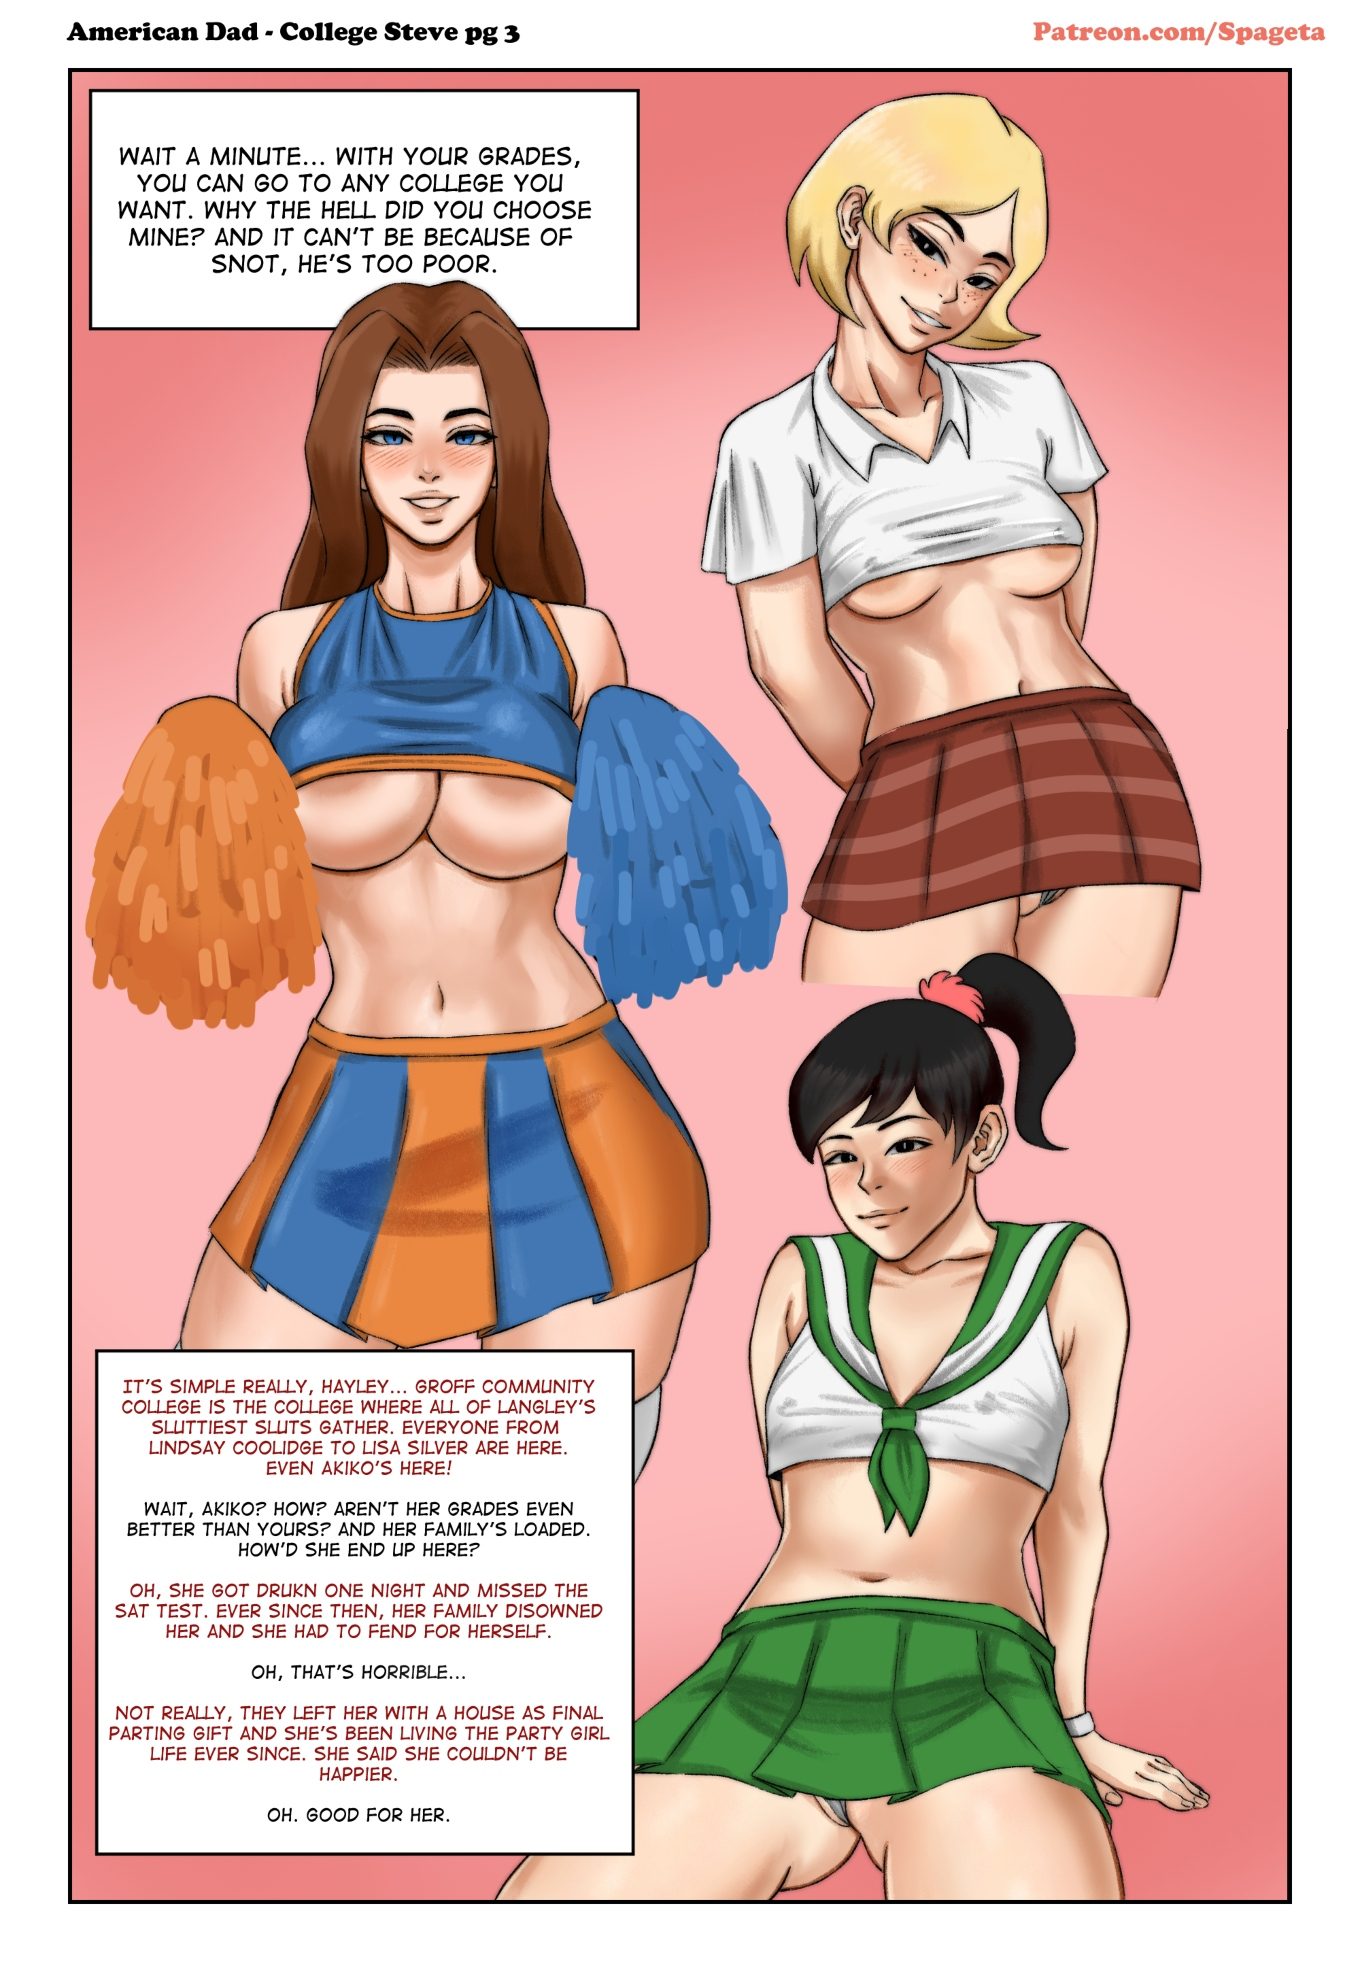 American Dad Hayley And Steve Porn - College Steve - American Dad by Spageta - FreeAdultComix